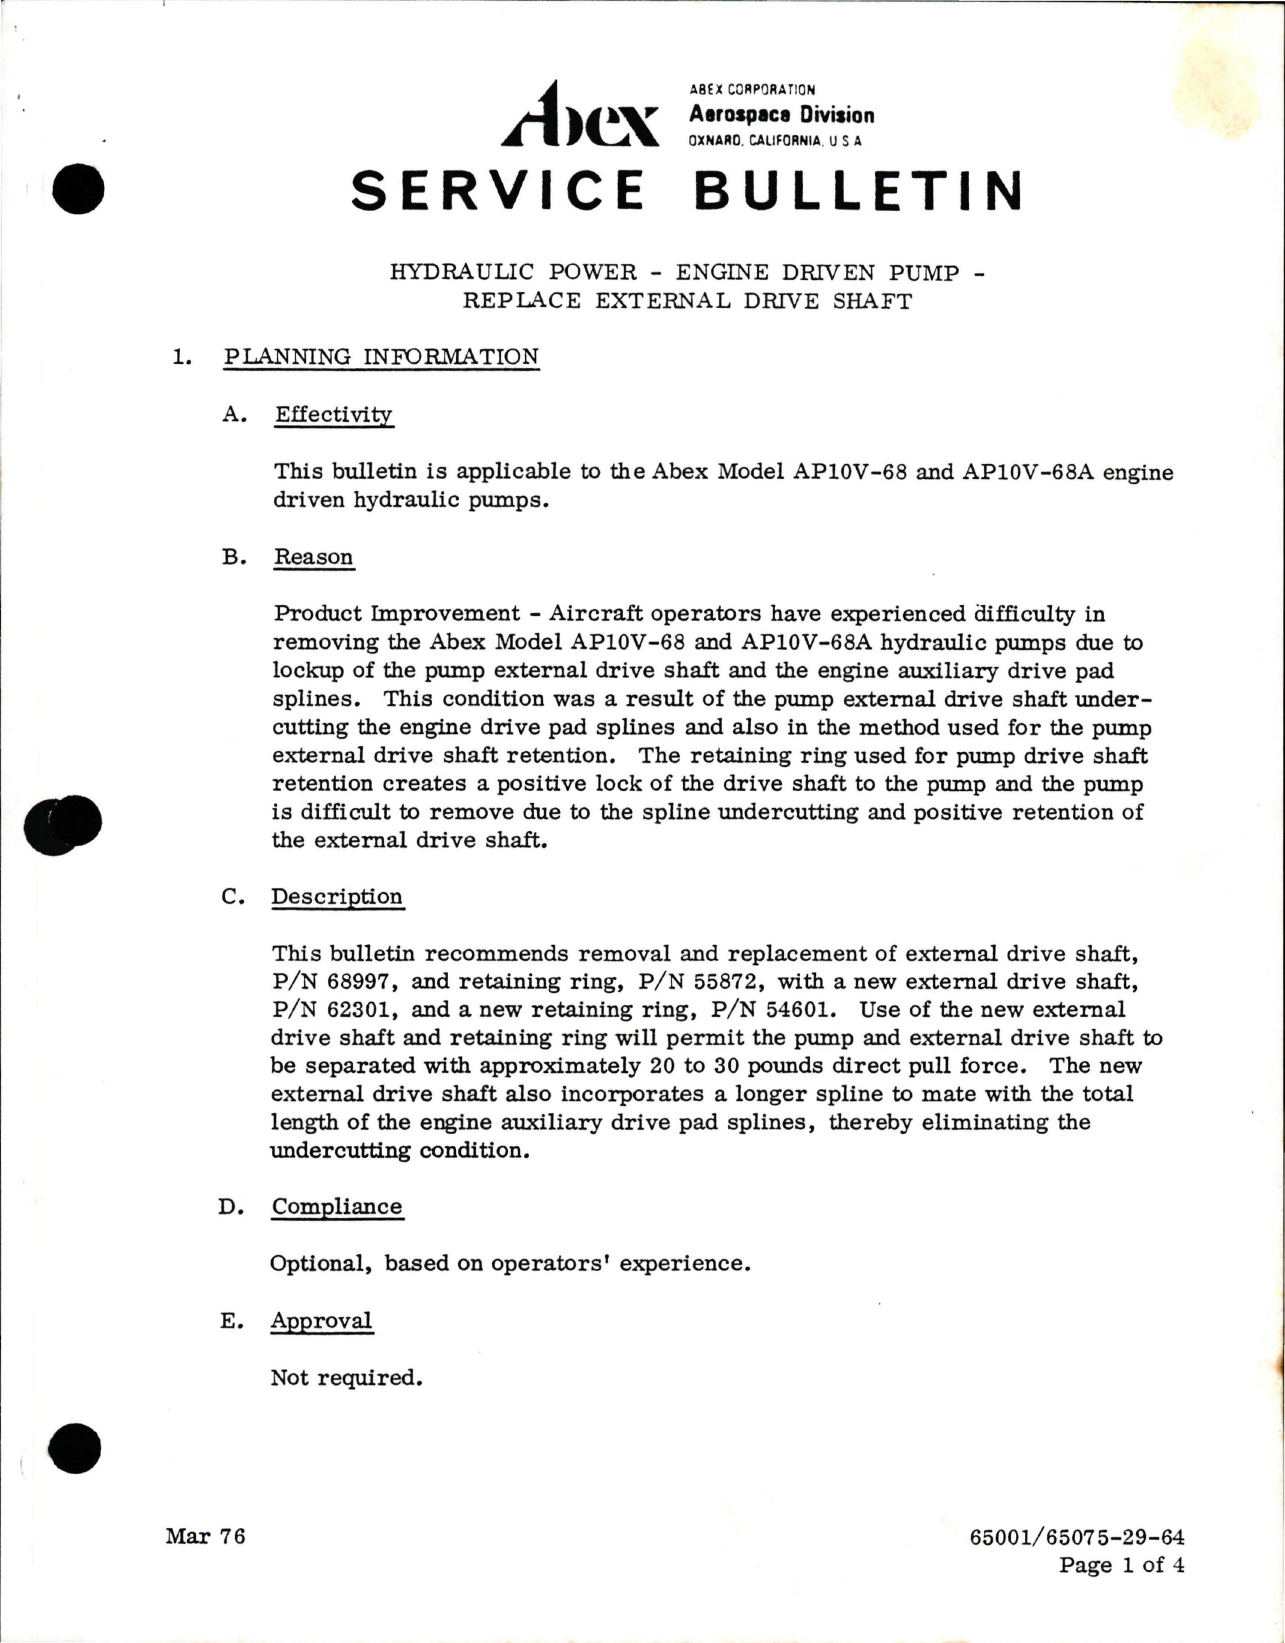 Sample page 1 from AirCorps Library document: Replace External Drive Shaft for Hydraulic Pump 